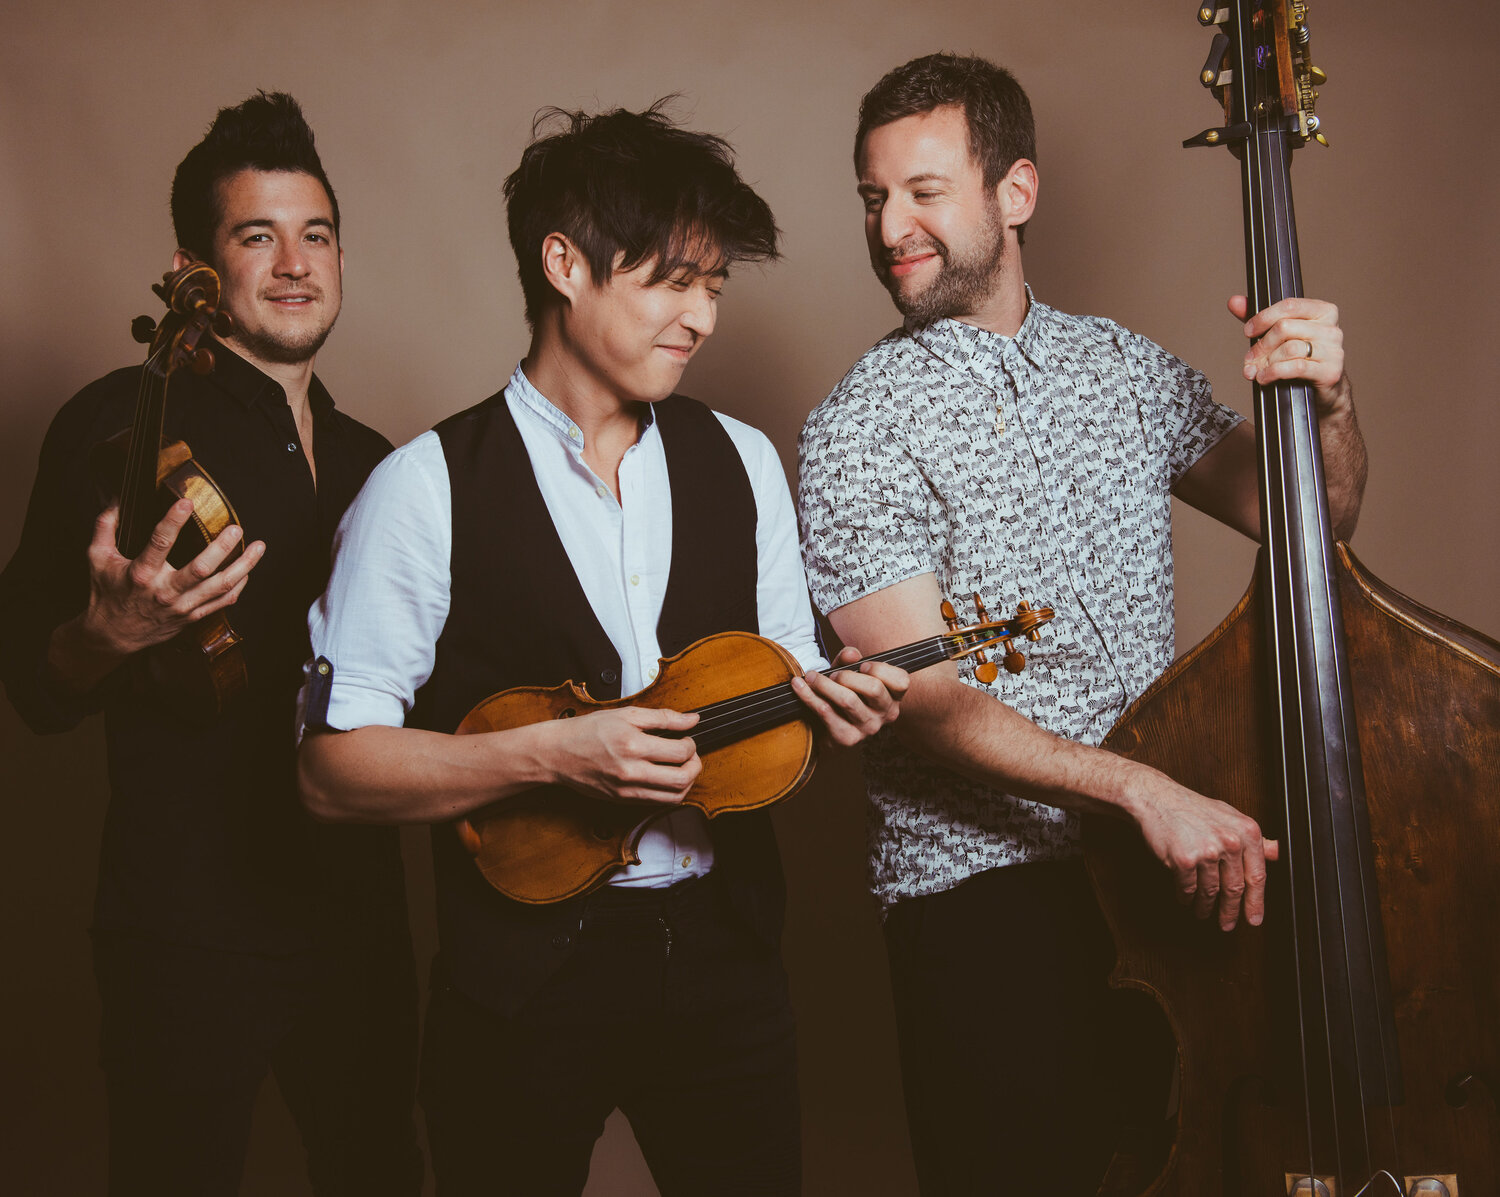 Time For Three (TF3) spans classical music, Americana, and singer-songwriter styles. Comprising Charles Yang, Nicolas Kendall, and Ranaan Meyer, TF3’s blend of instruments and voices resonates with listeners globally.